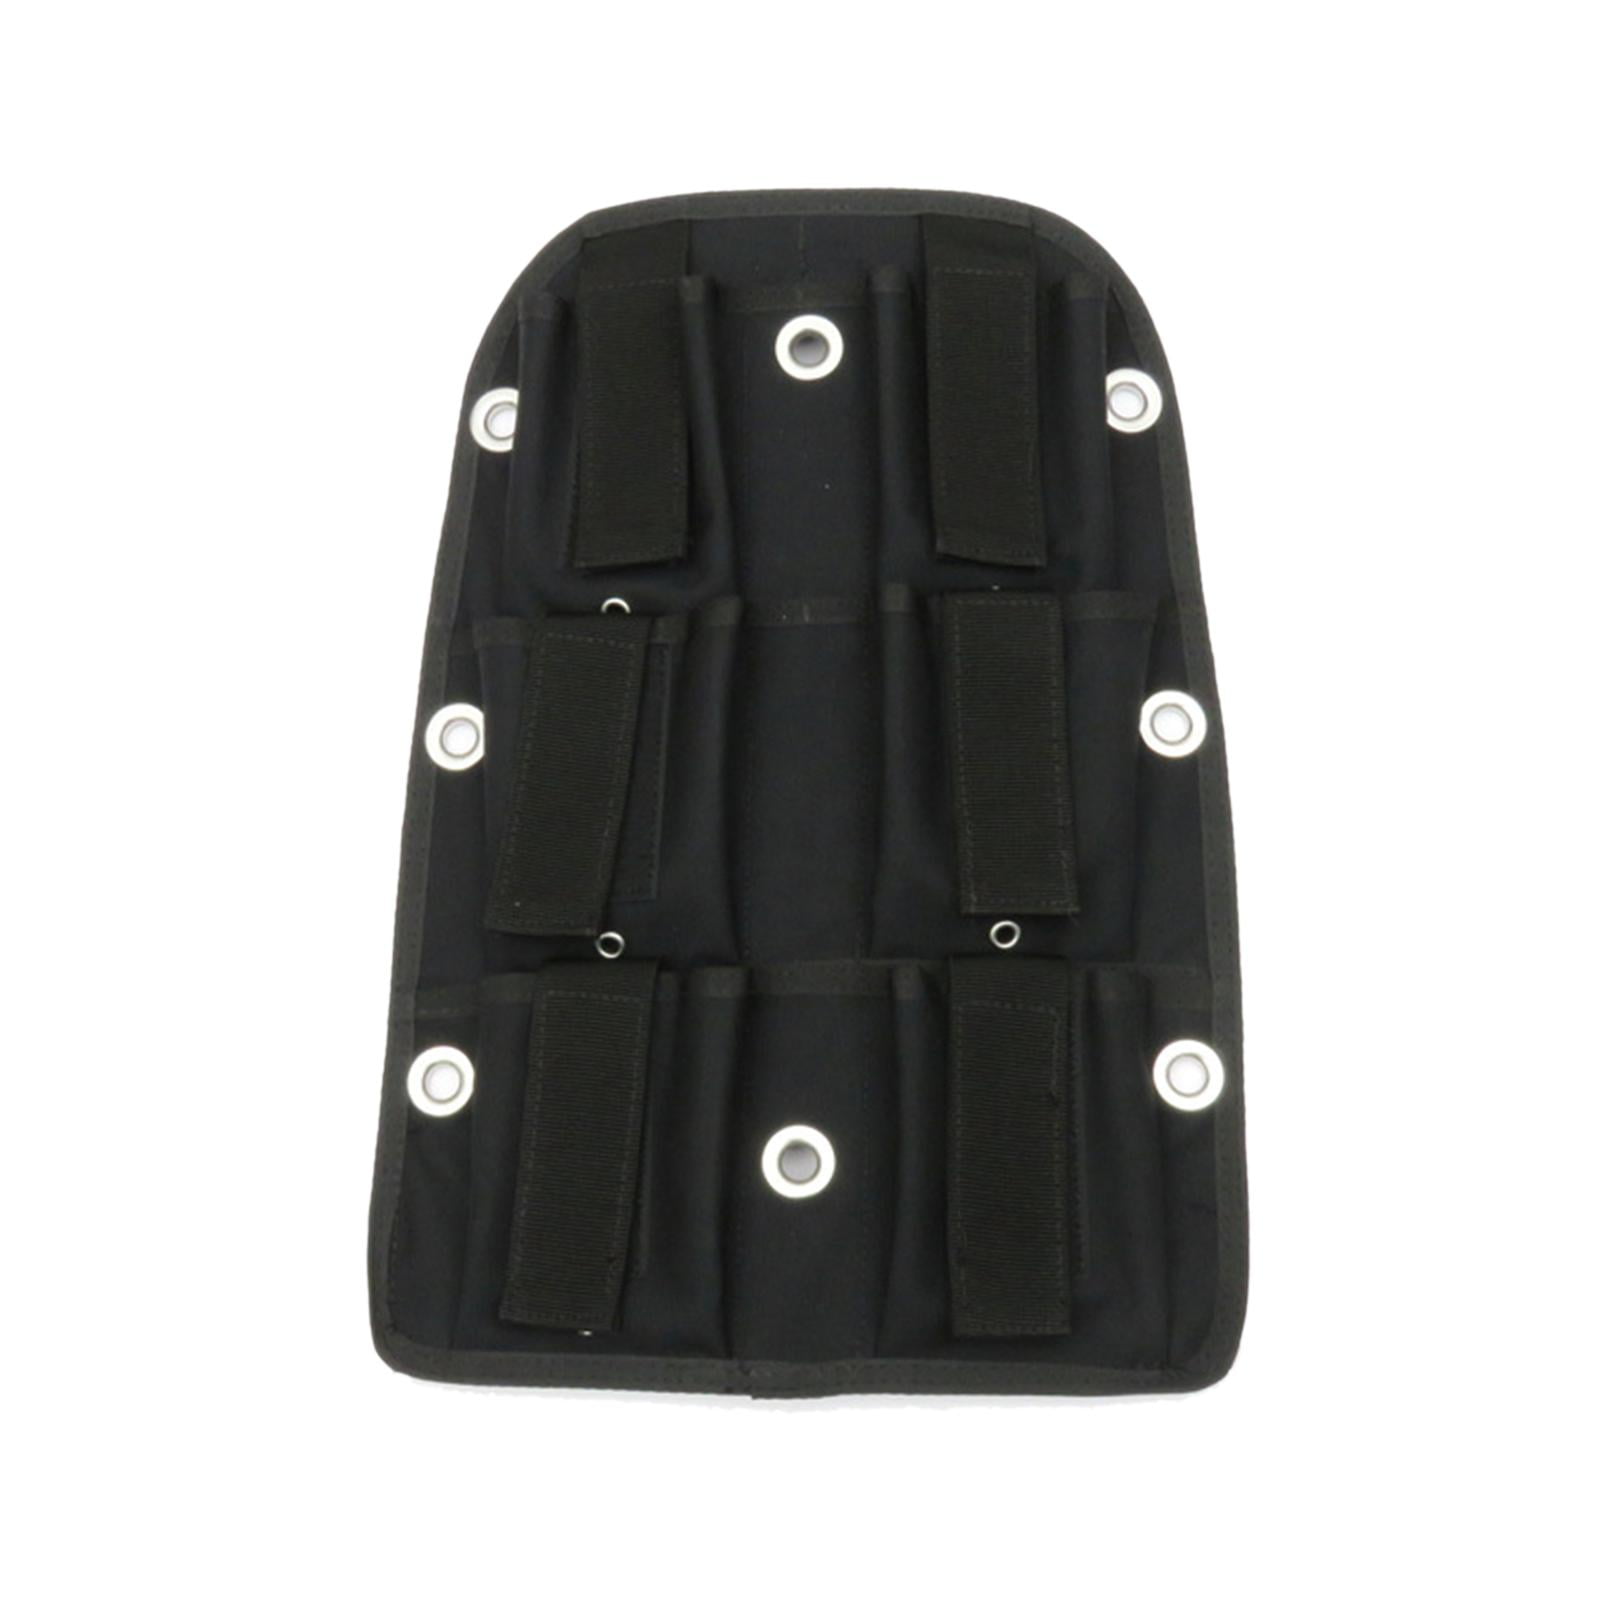 Scuba Tech Diving Nylon Backplate with Pad Dive Tank Black Plate Accessory 